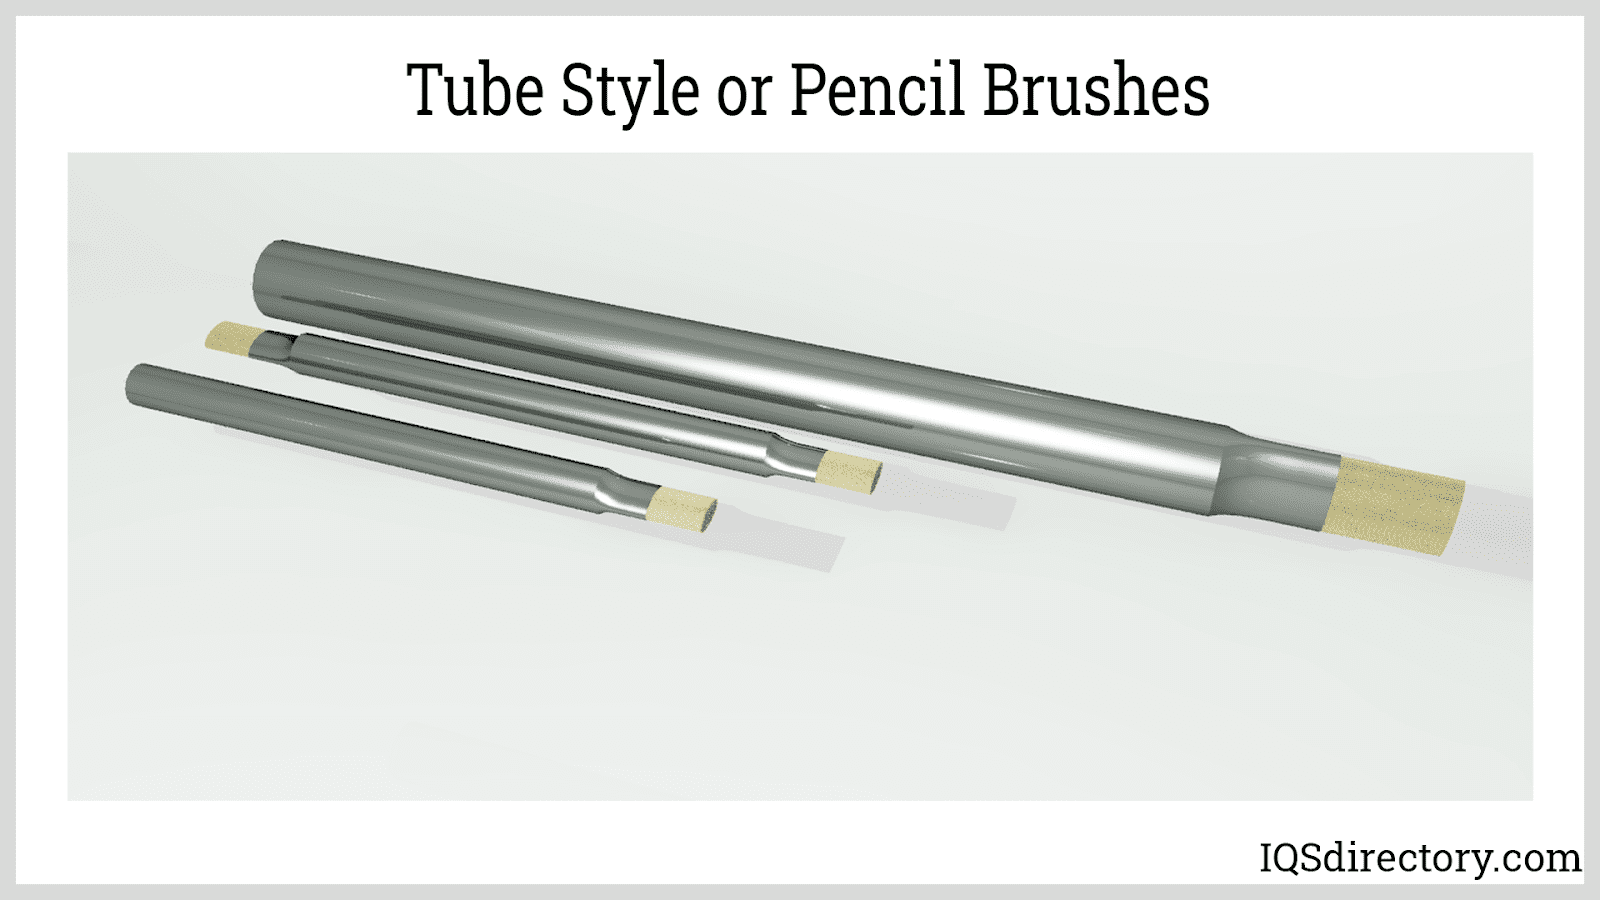 Tube Style or Pencil Brushes